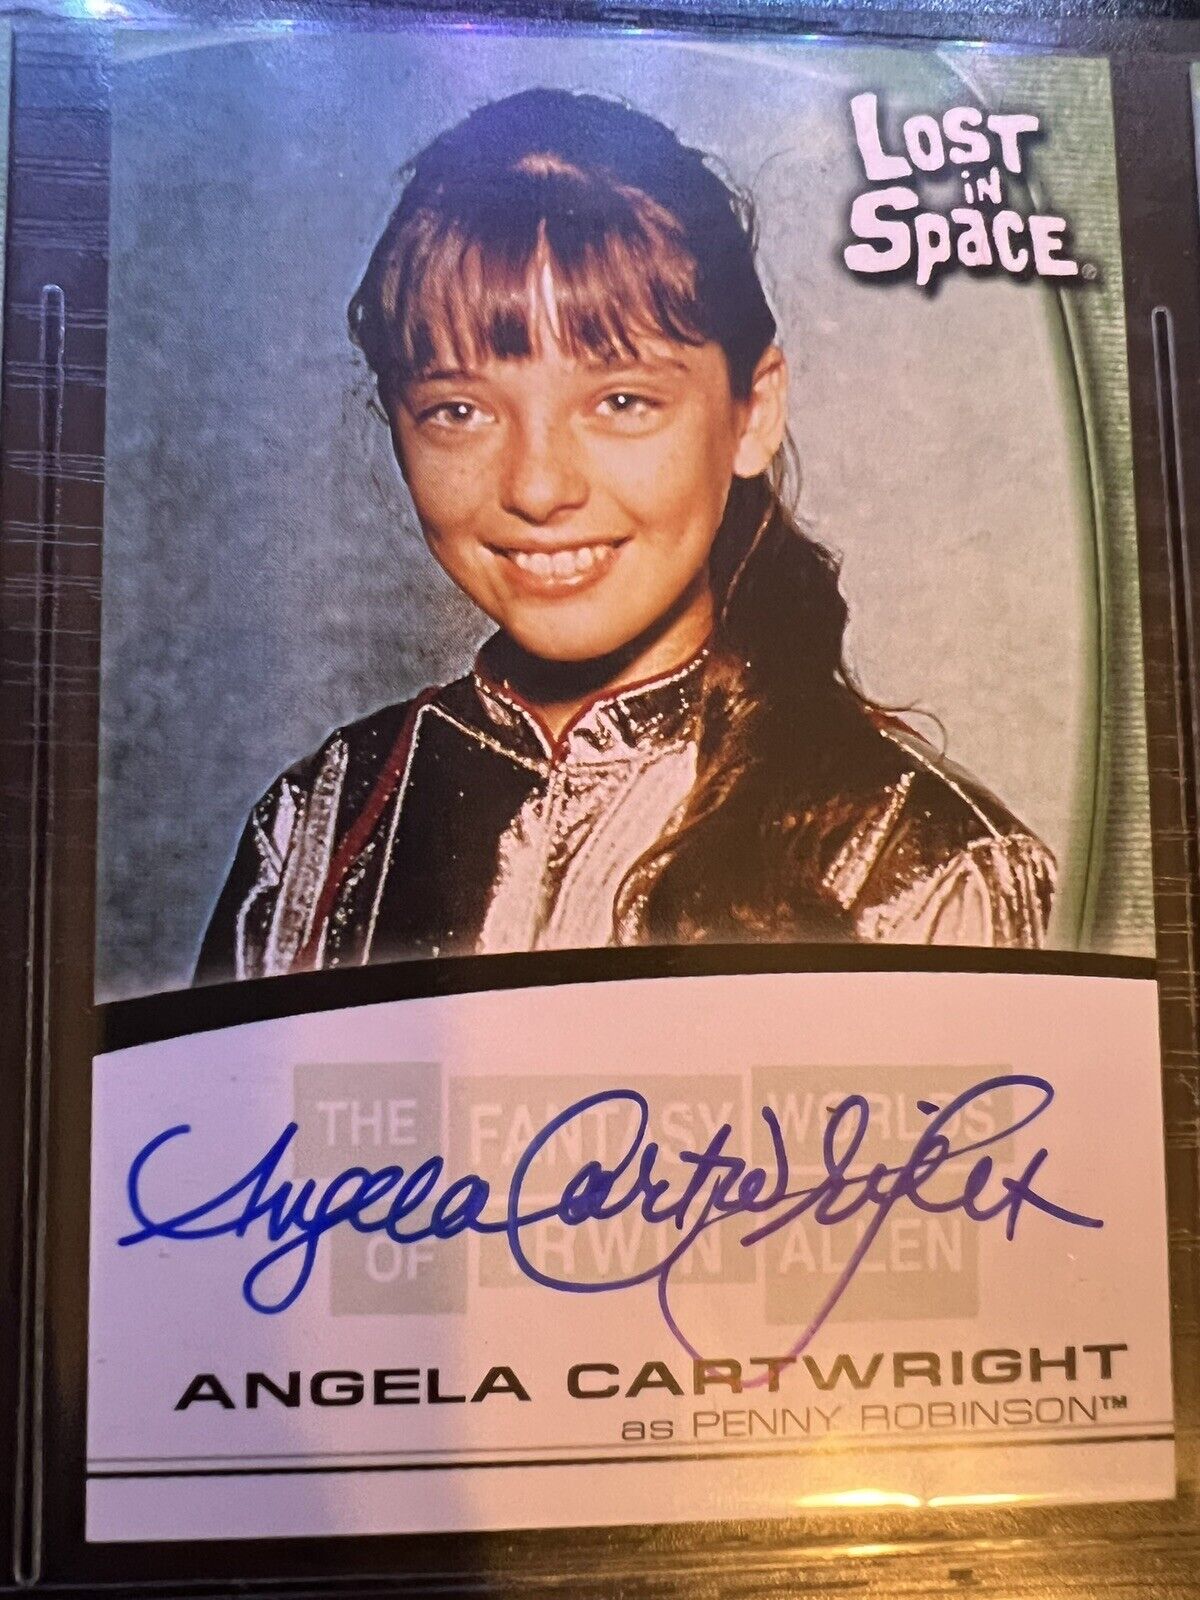 Lost In Space Origional Series ANGELA CARTWRIGHT as Penny Autograph Card